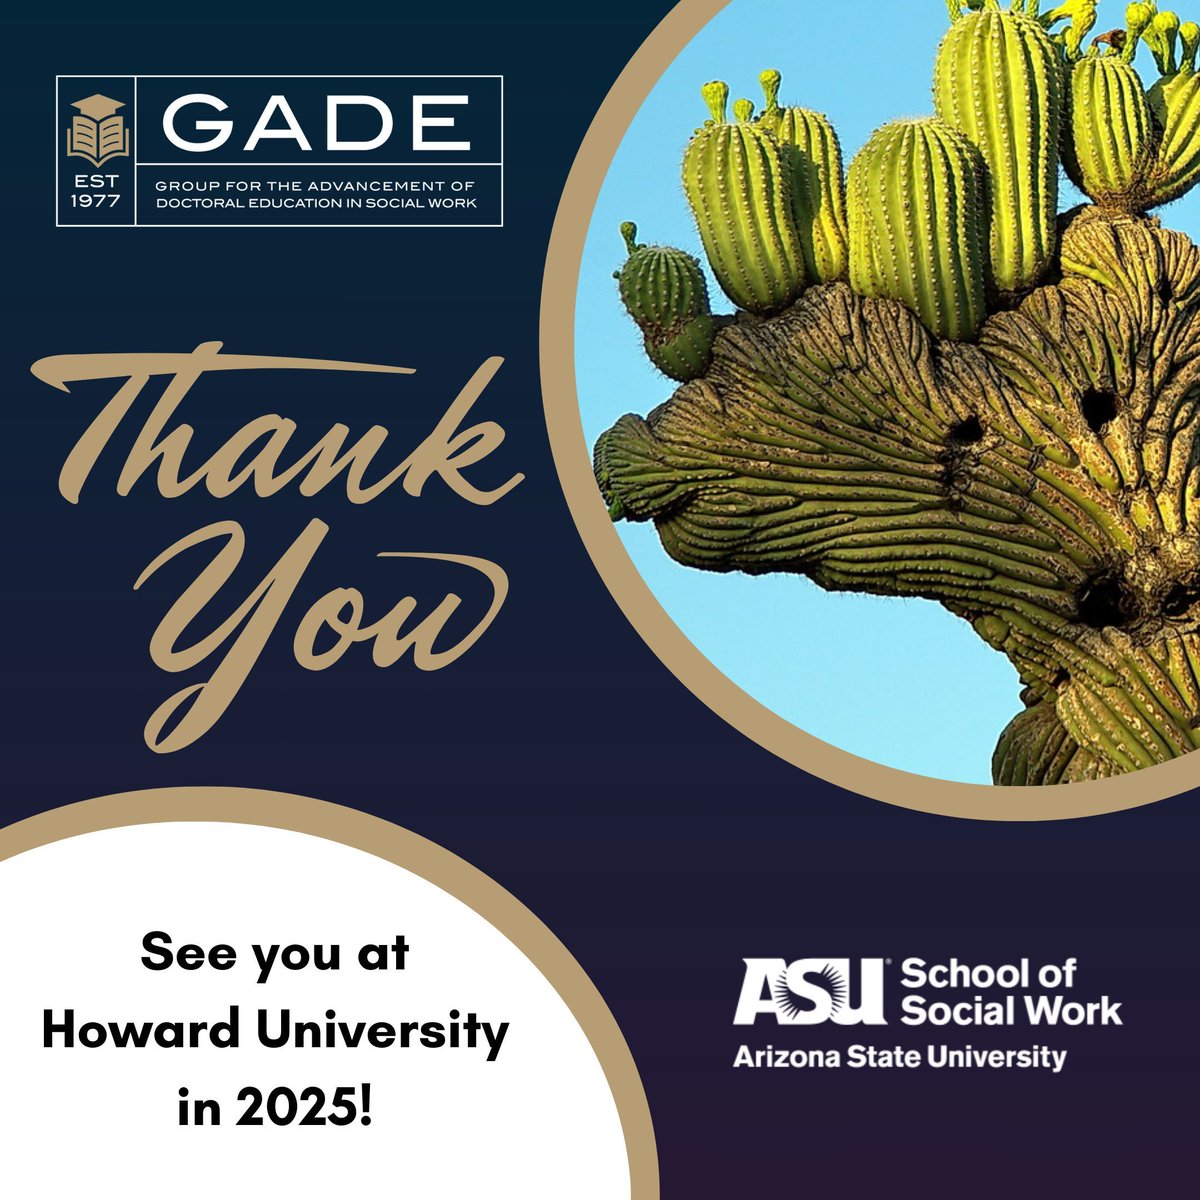 And that's a wrap for #GADE2024! Thank you to our members for joining us in sunny AZ and thank you @ASUSocialWork for hosting. See you next year at Howard University!